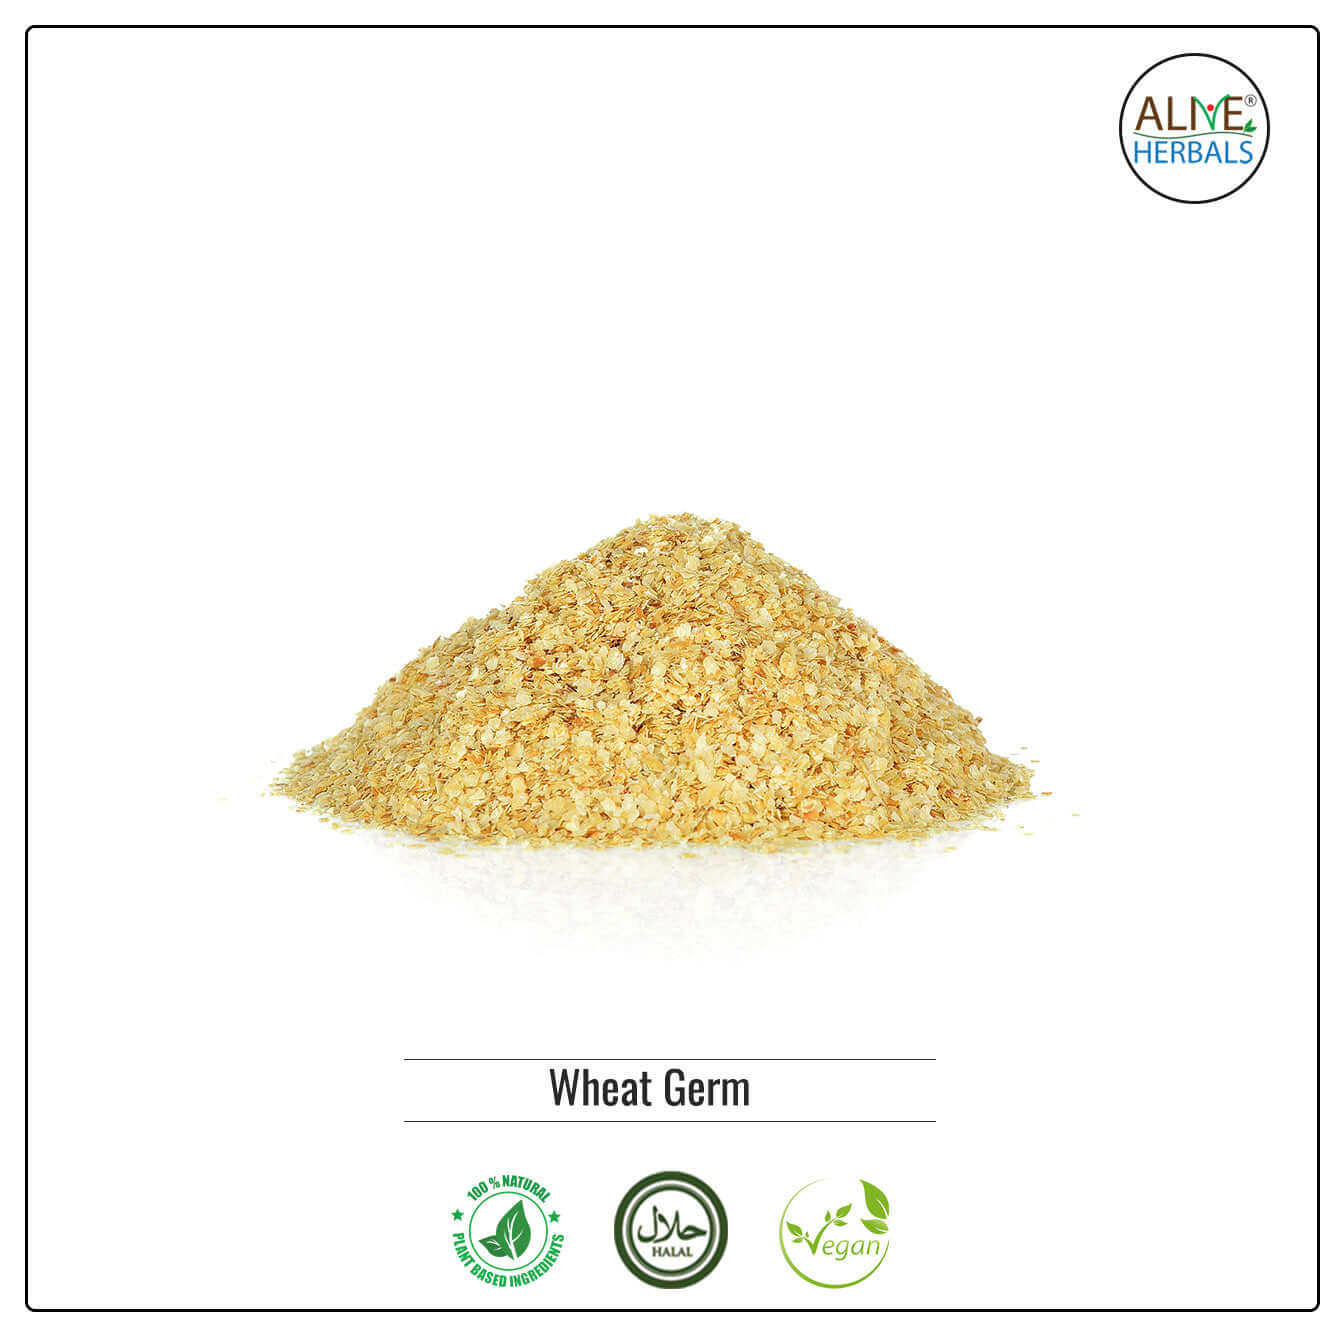 Wheat Germ Toasted - Shop at Natural Food Store | Alive Herbals.